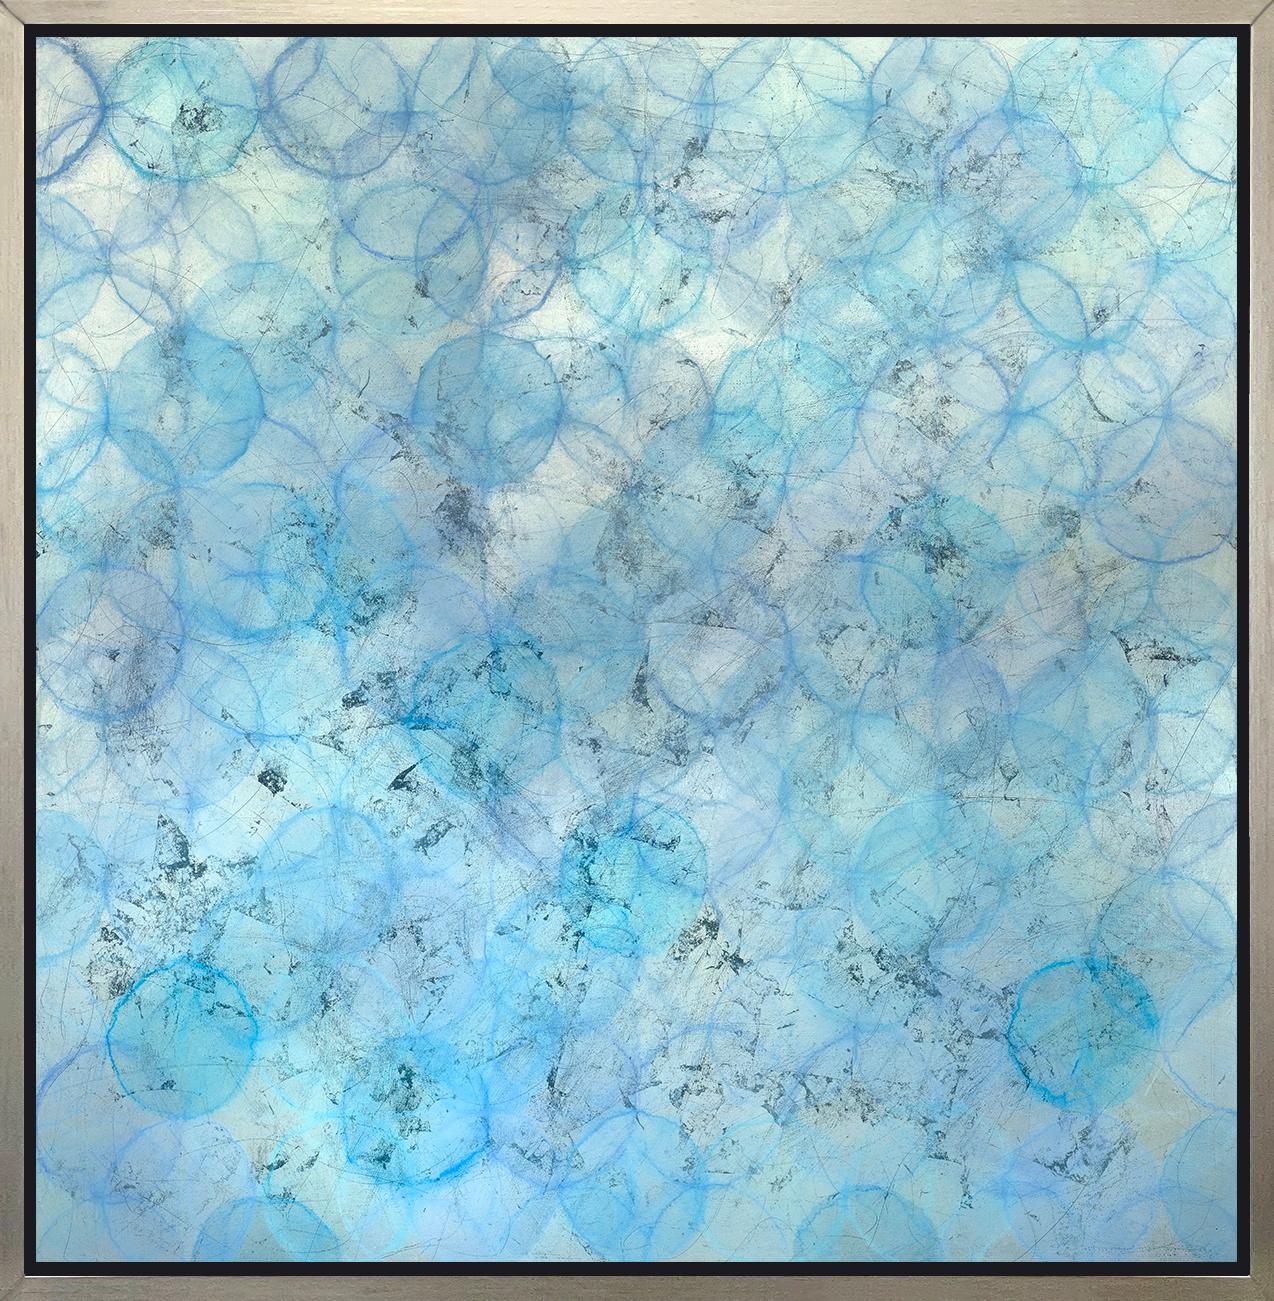 Roger Mudre Abstract Print - "Brunnera, " Framed Limited Edition Giclee Print, 40" x 40"